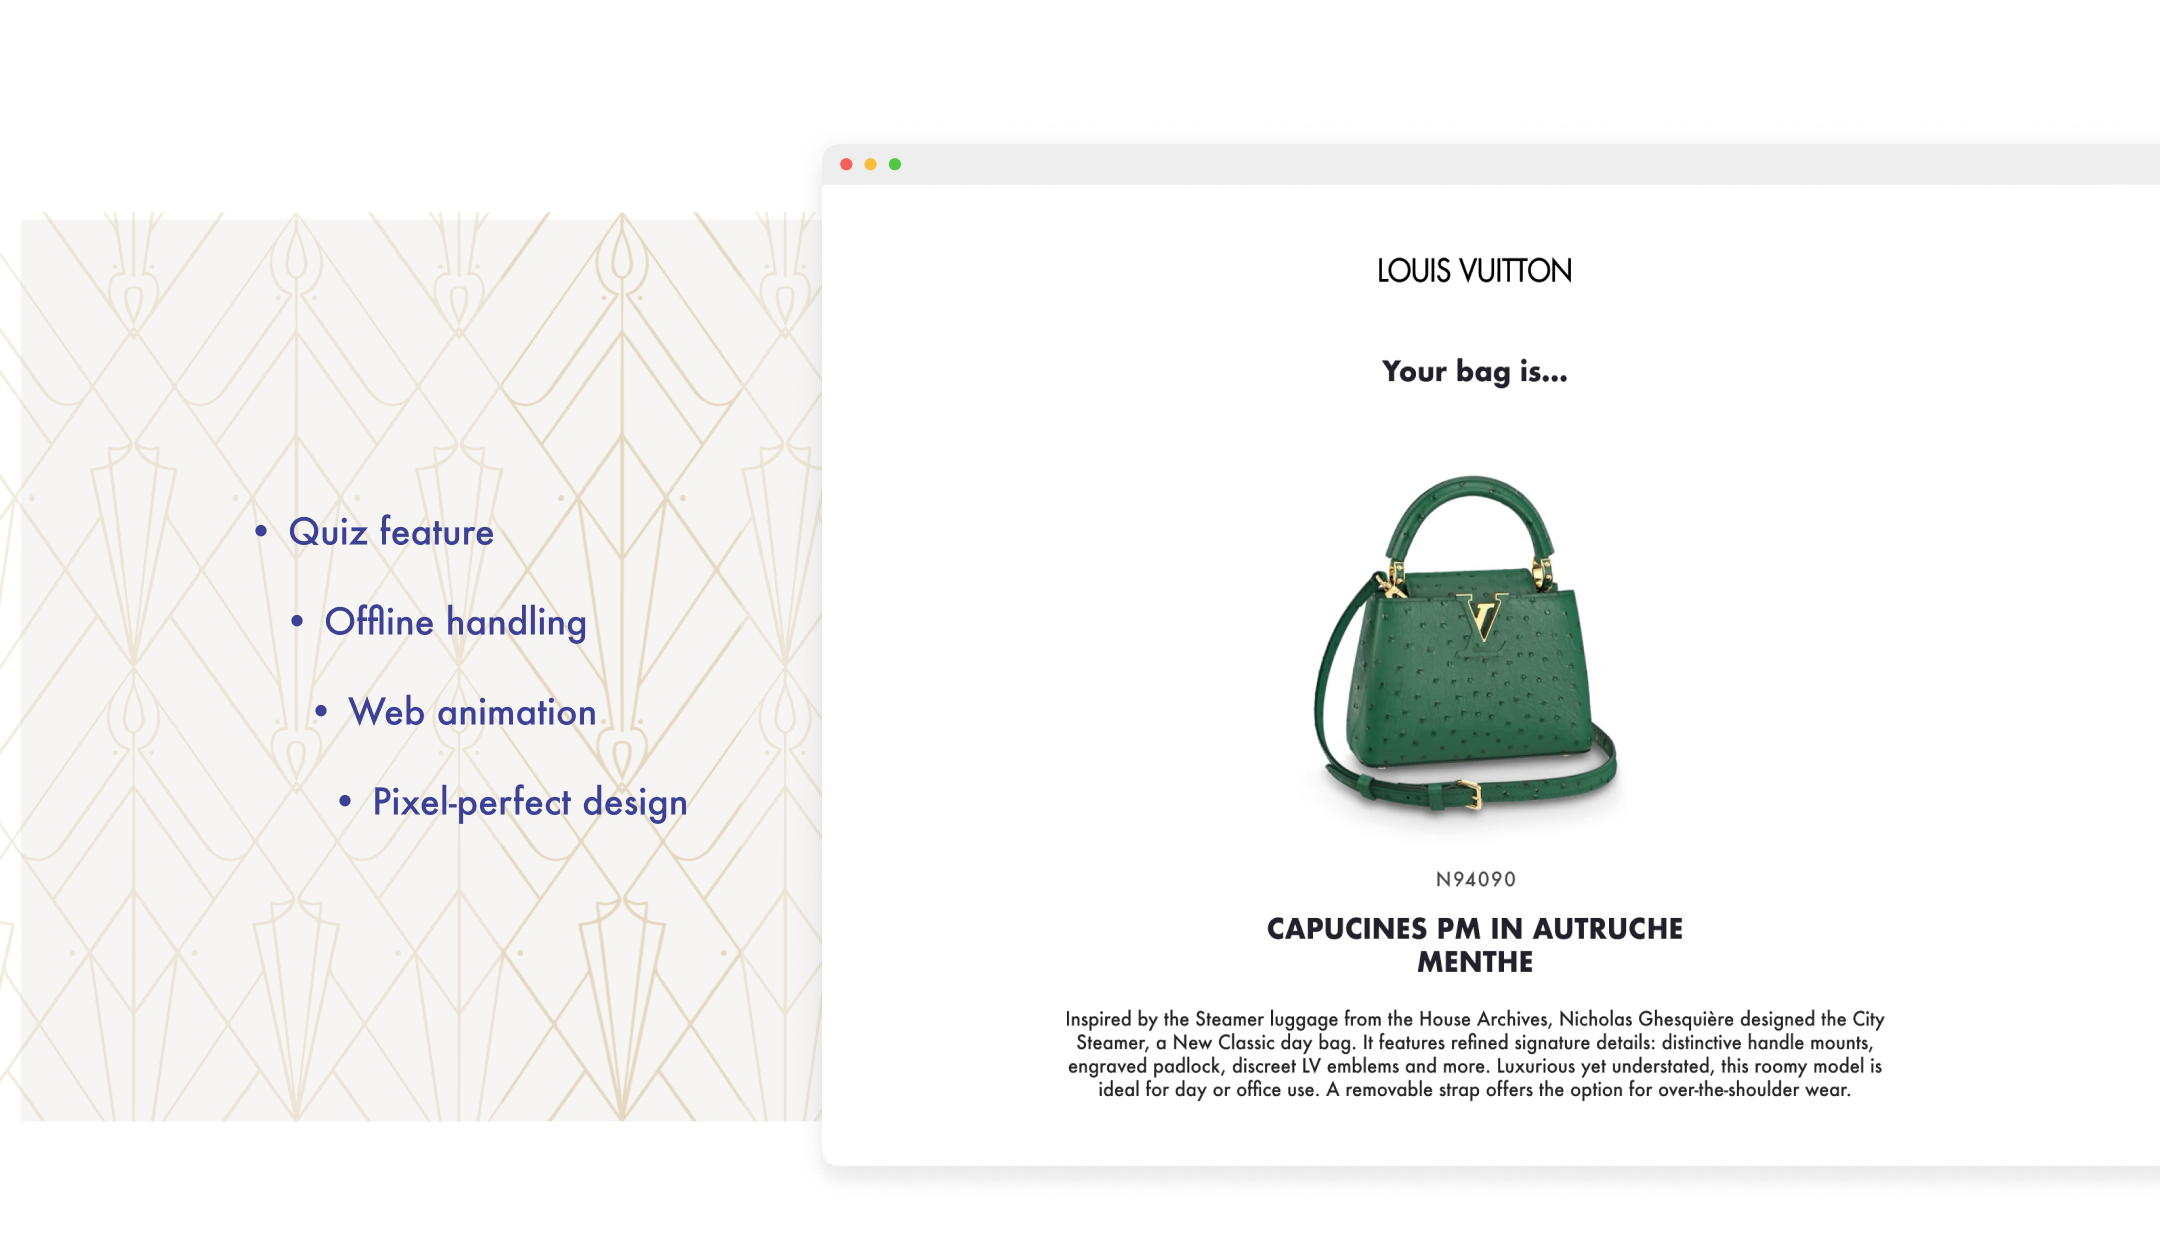 Louis Vuitton website featuring a small green crocodile leather handbag with silver metal hardware and the iconic LV monogram on the front. 